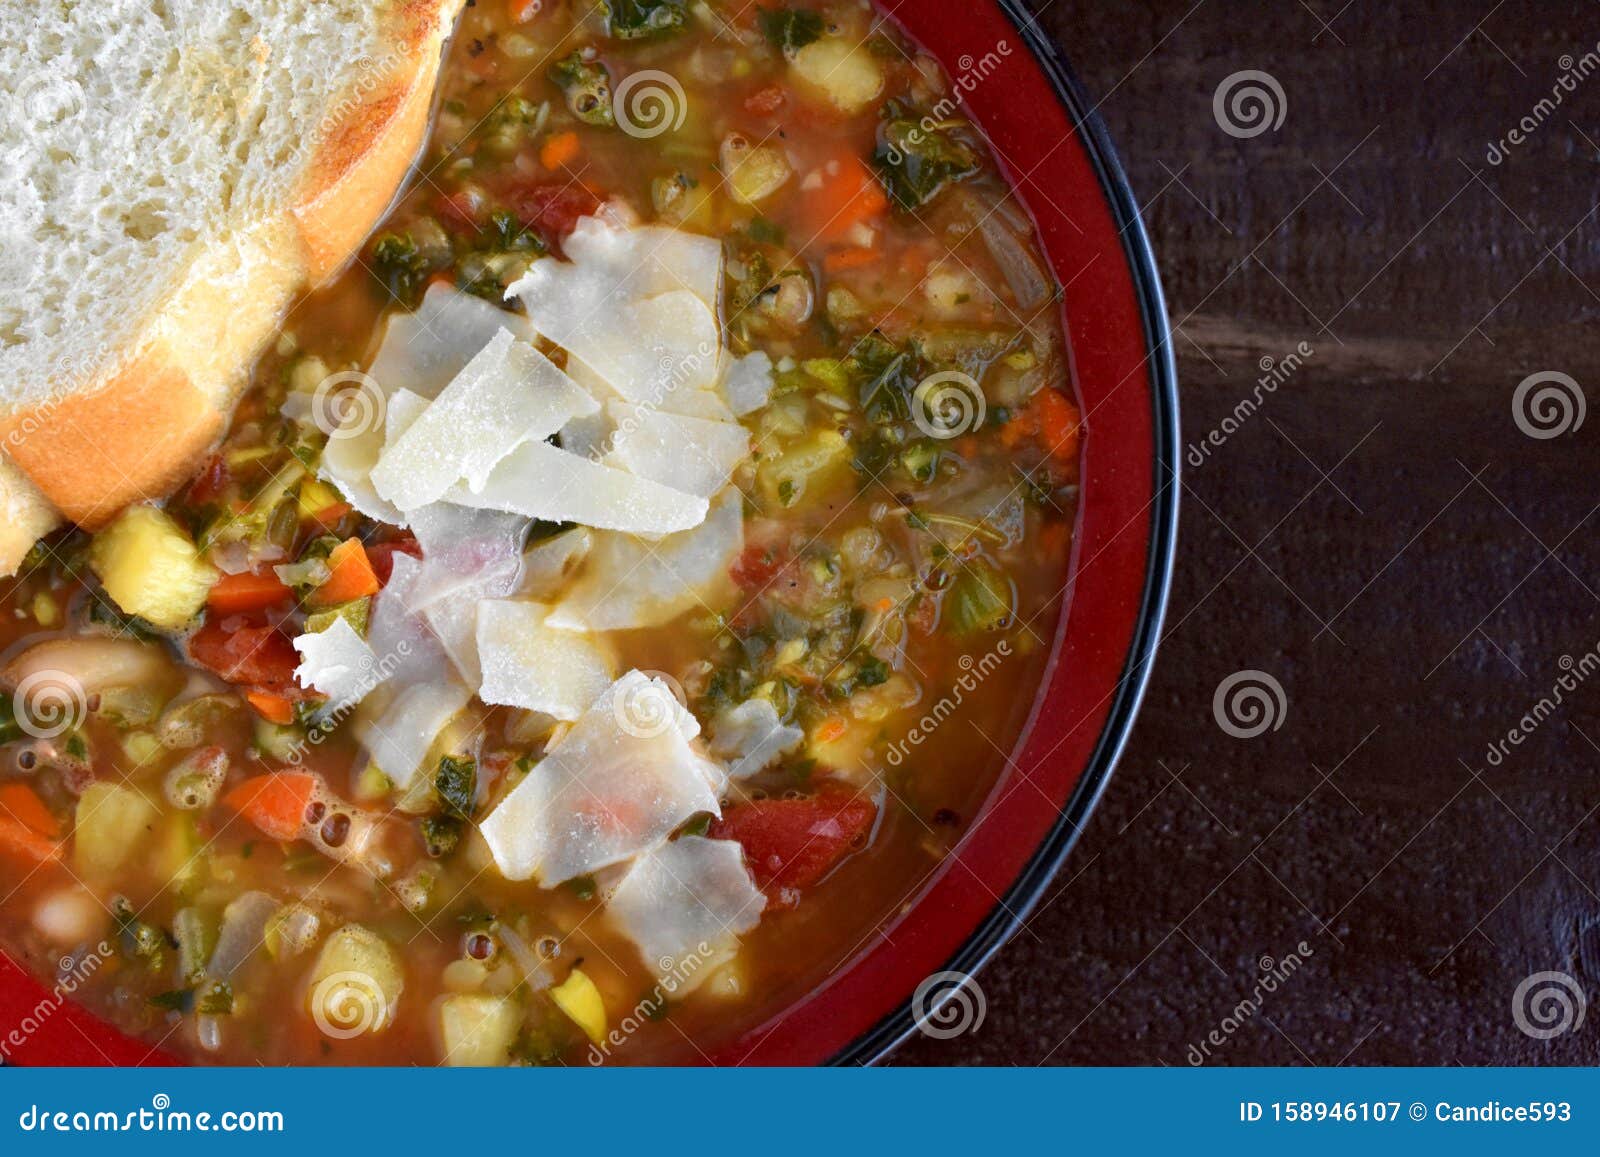 tuscan bean soup with vegetables